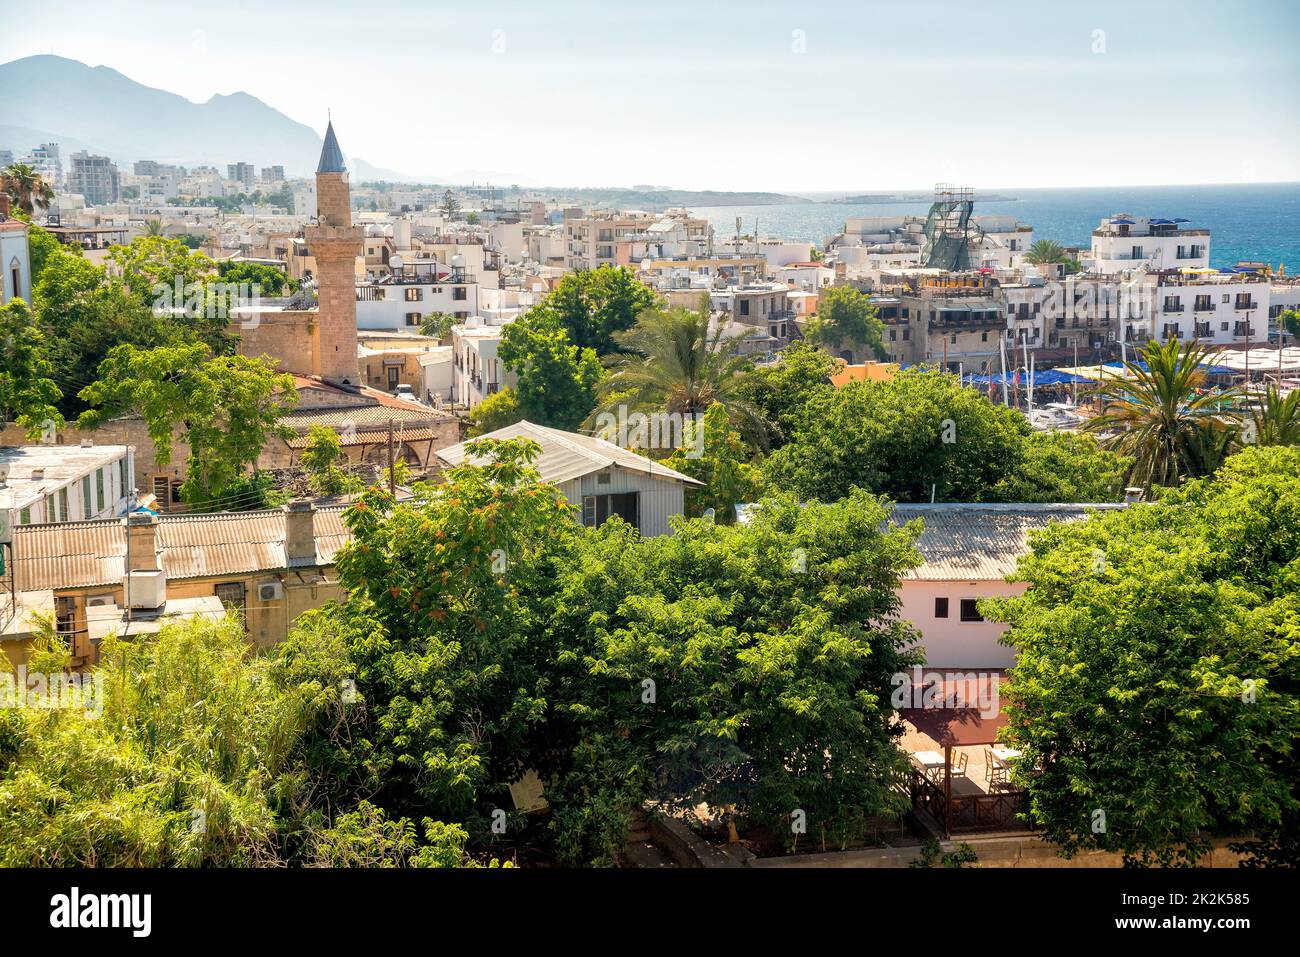 View of old town of Kyrenia. Cyprus Stock Photo